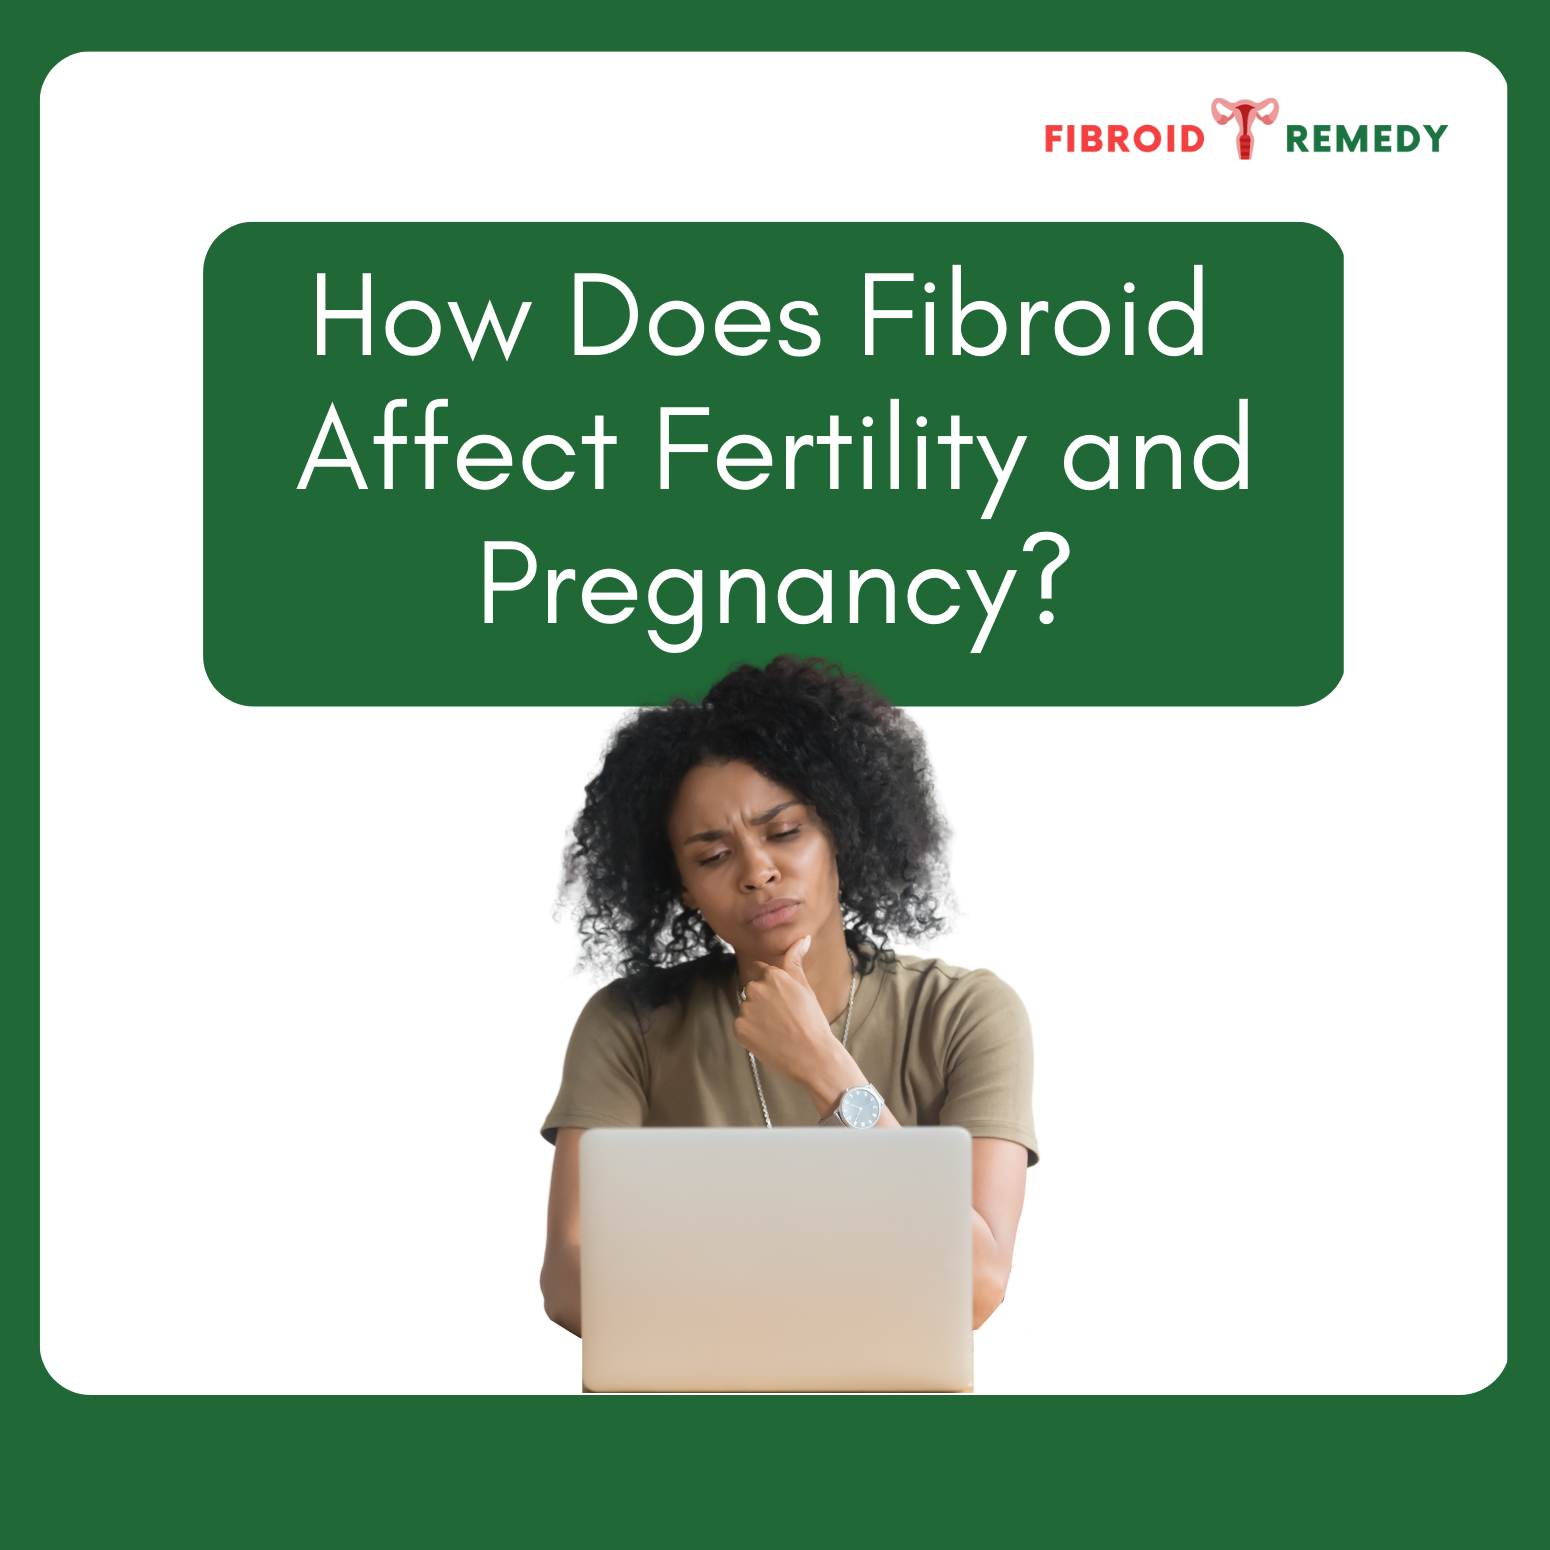 How Does Fibroid Affect Fertility and Pregnancy?